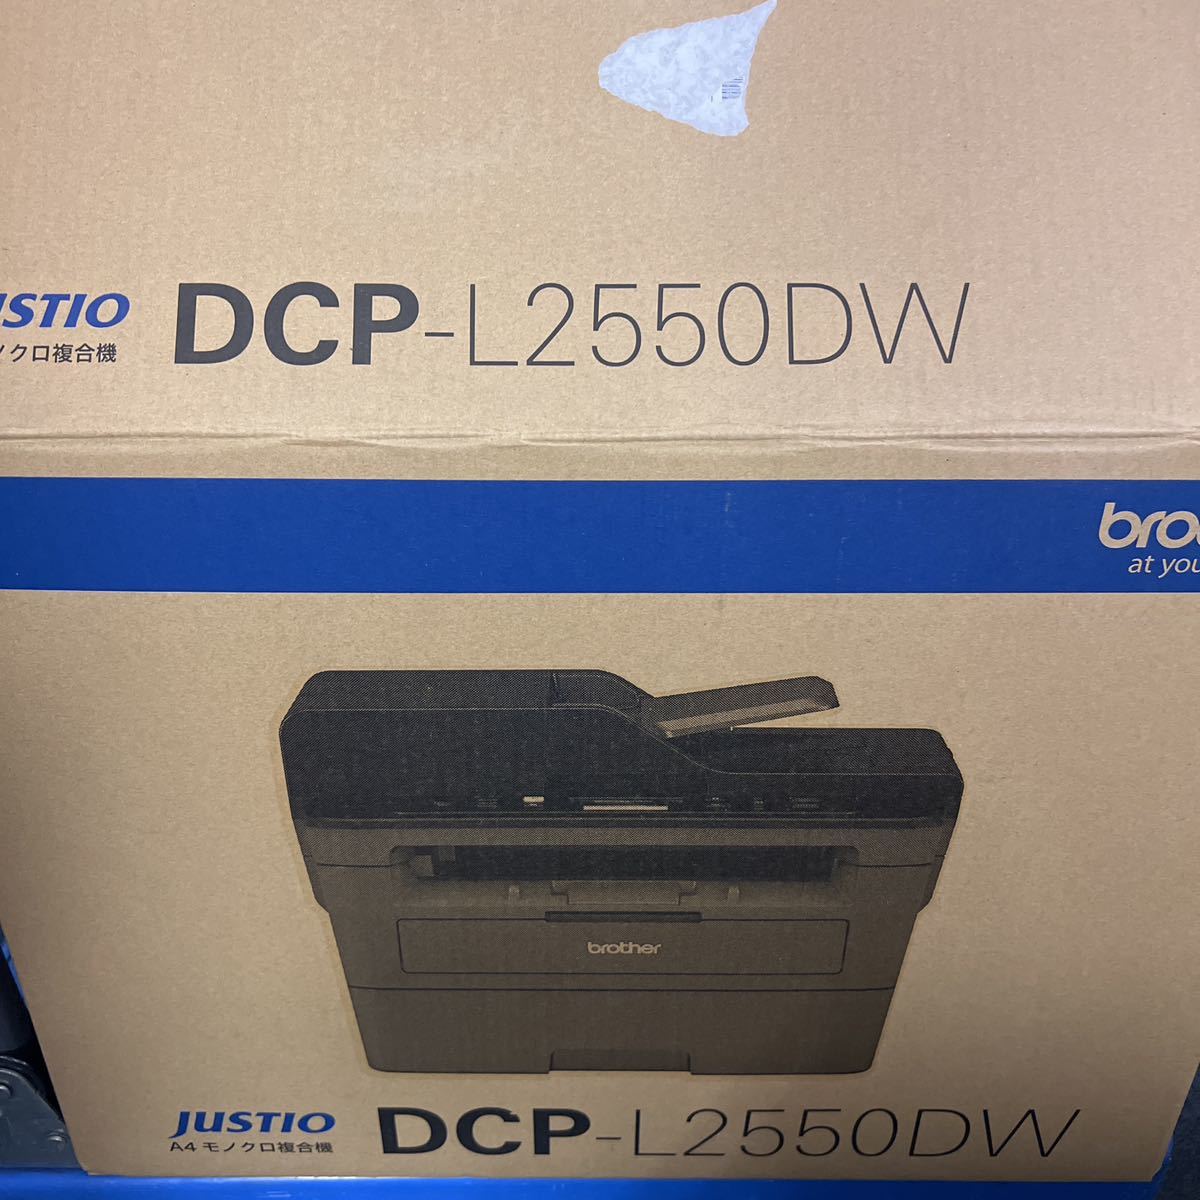 【brother】DCP-L2550DW モノクロ 複合機 開梱セットアップ済み、未使用品